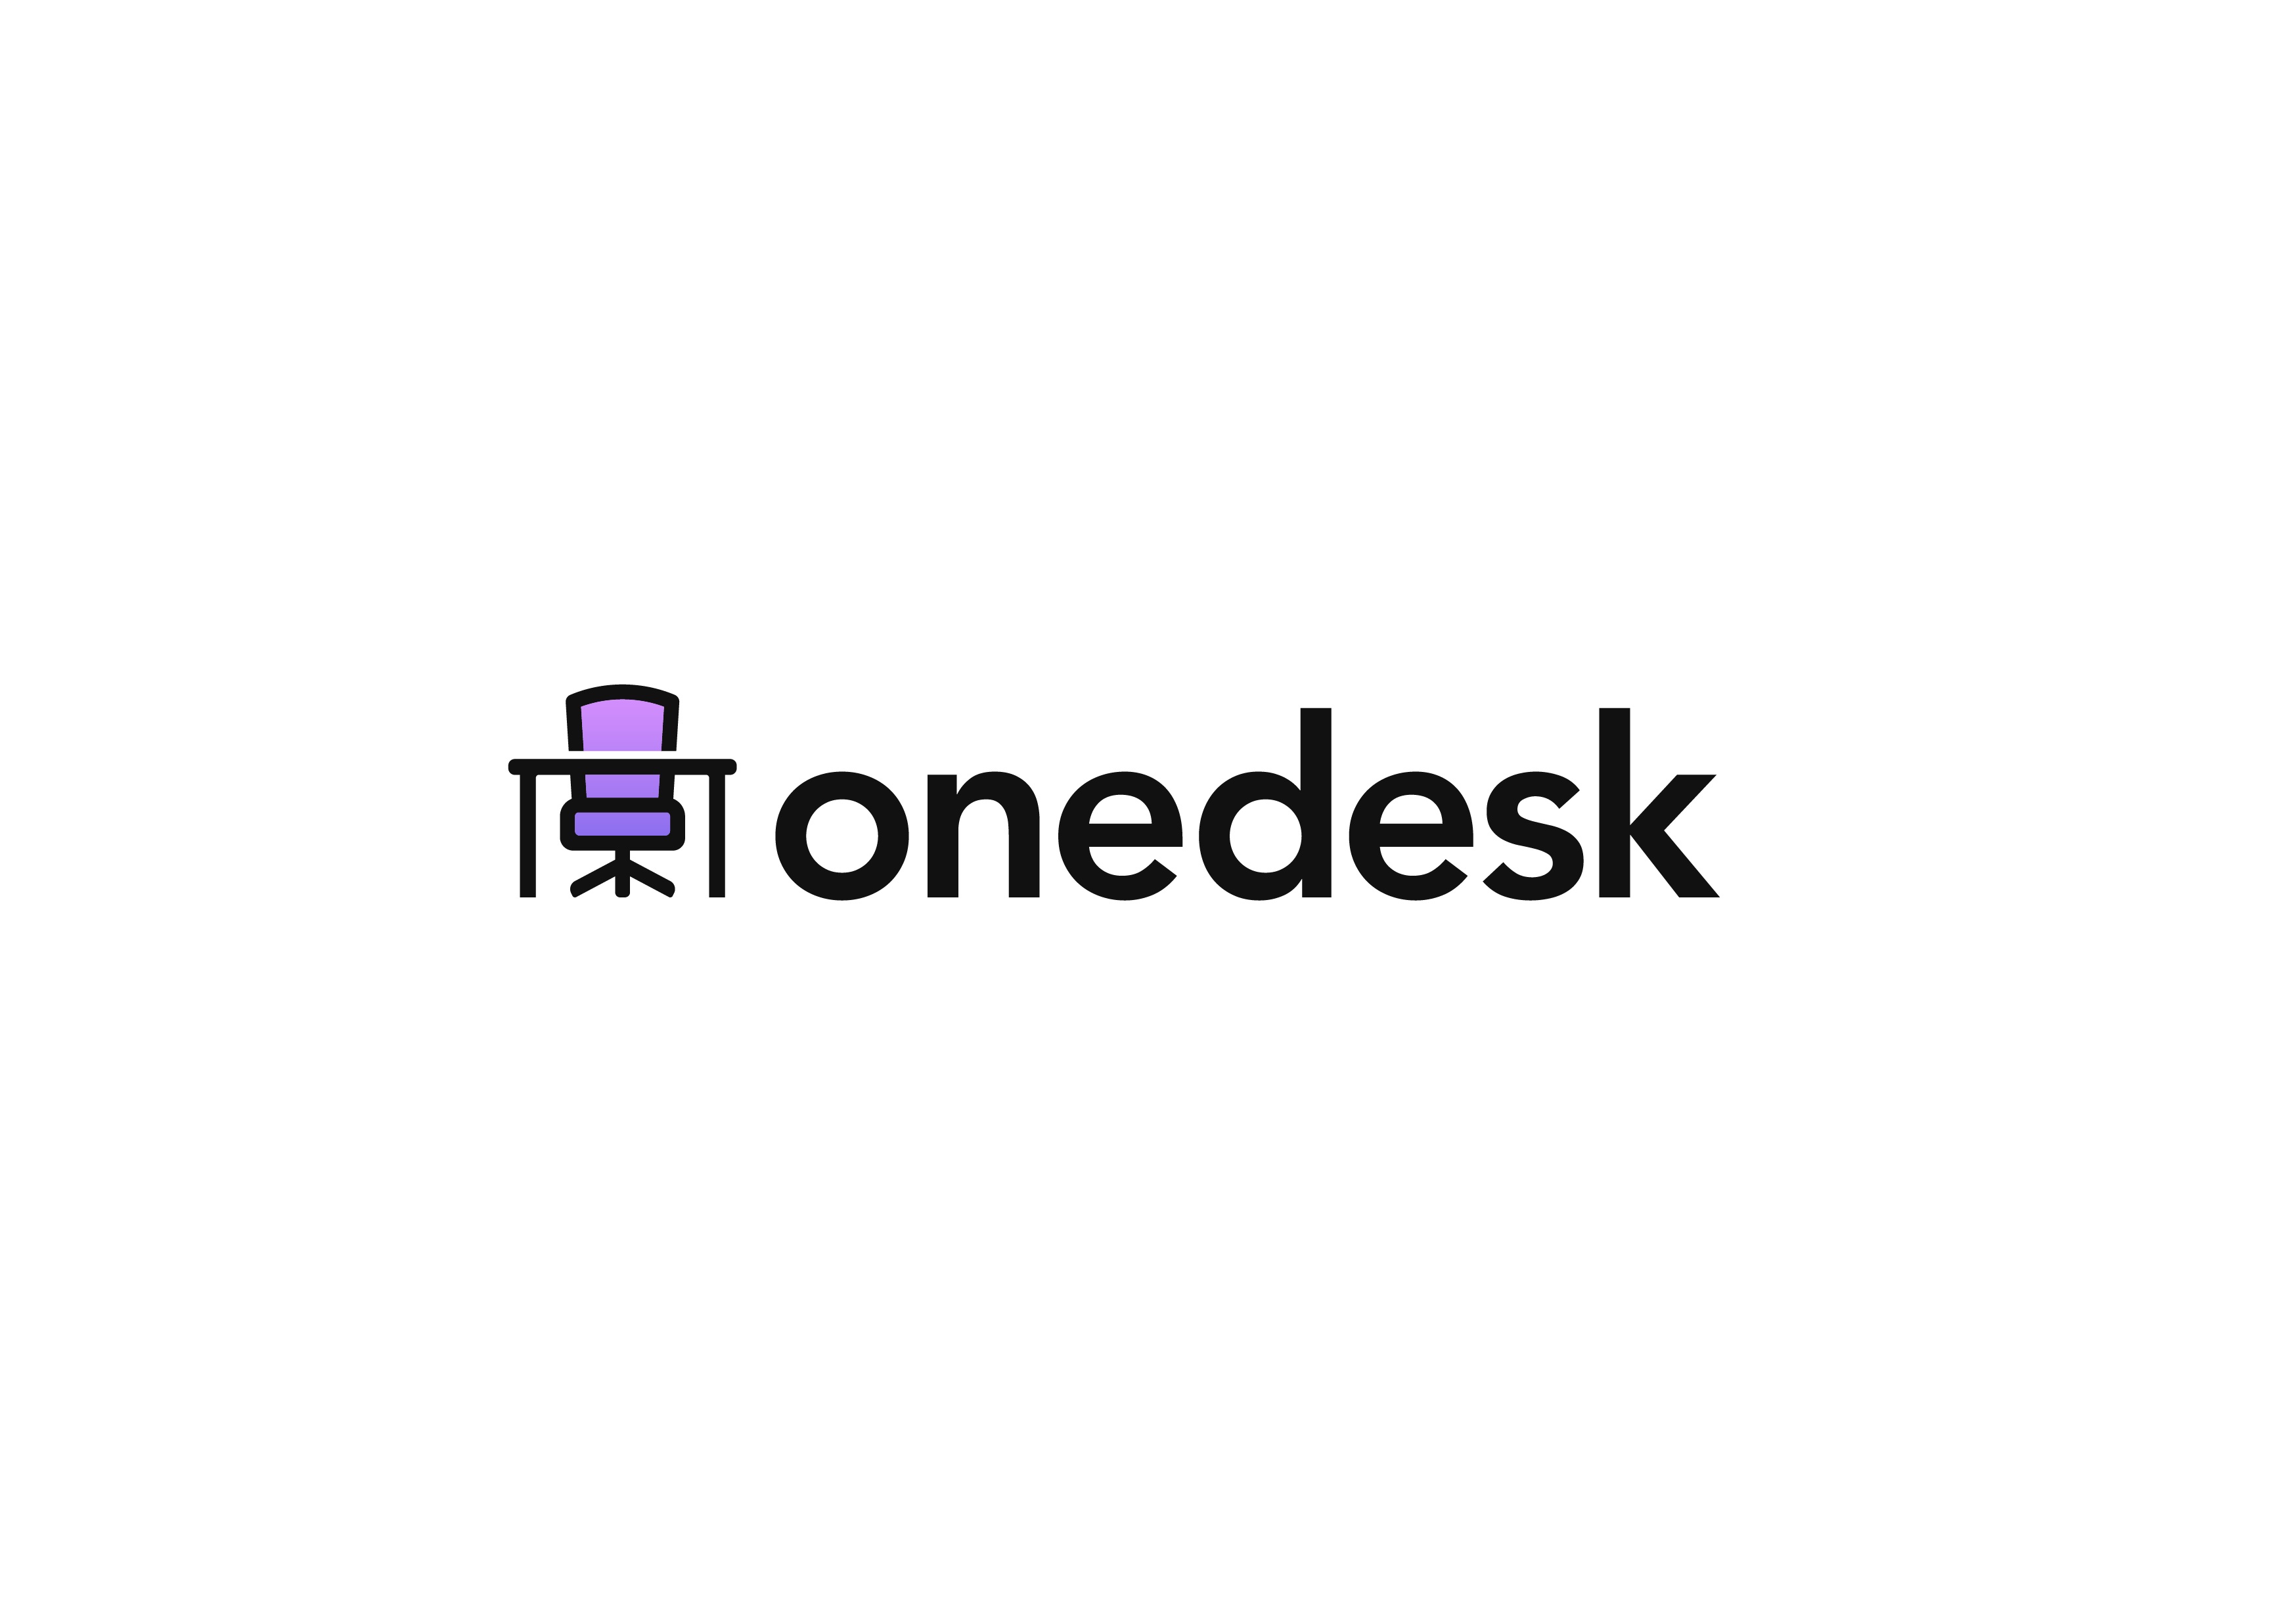 Onedesk Commercial Cleaning